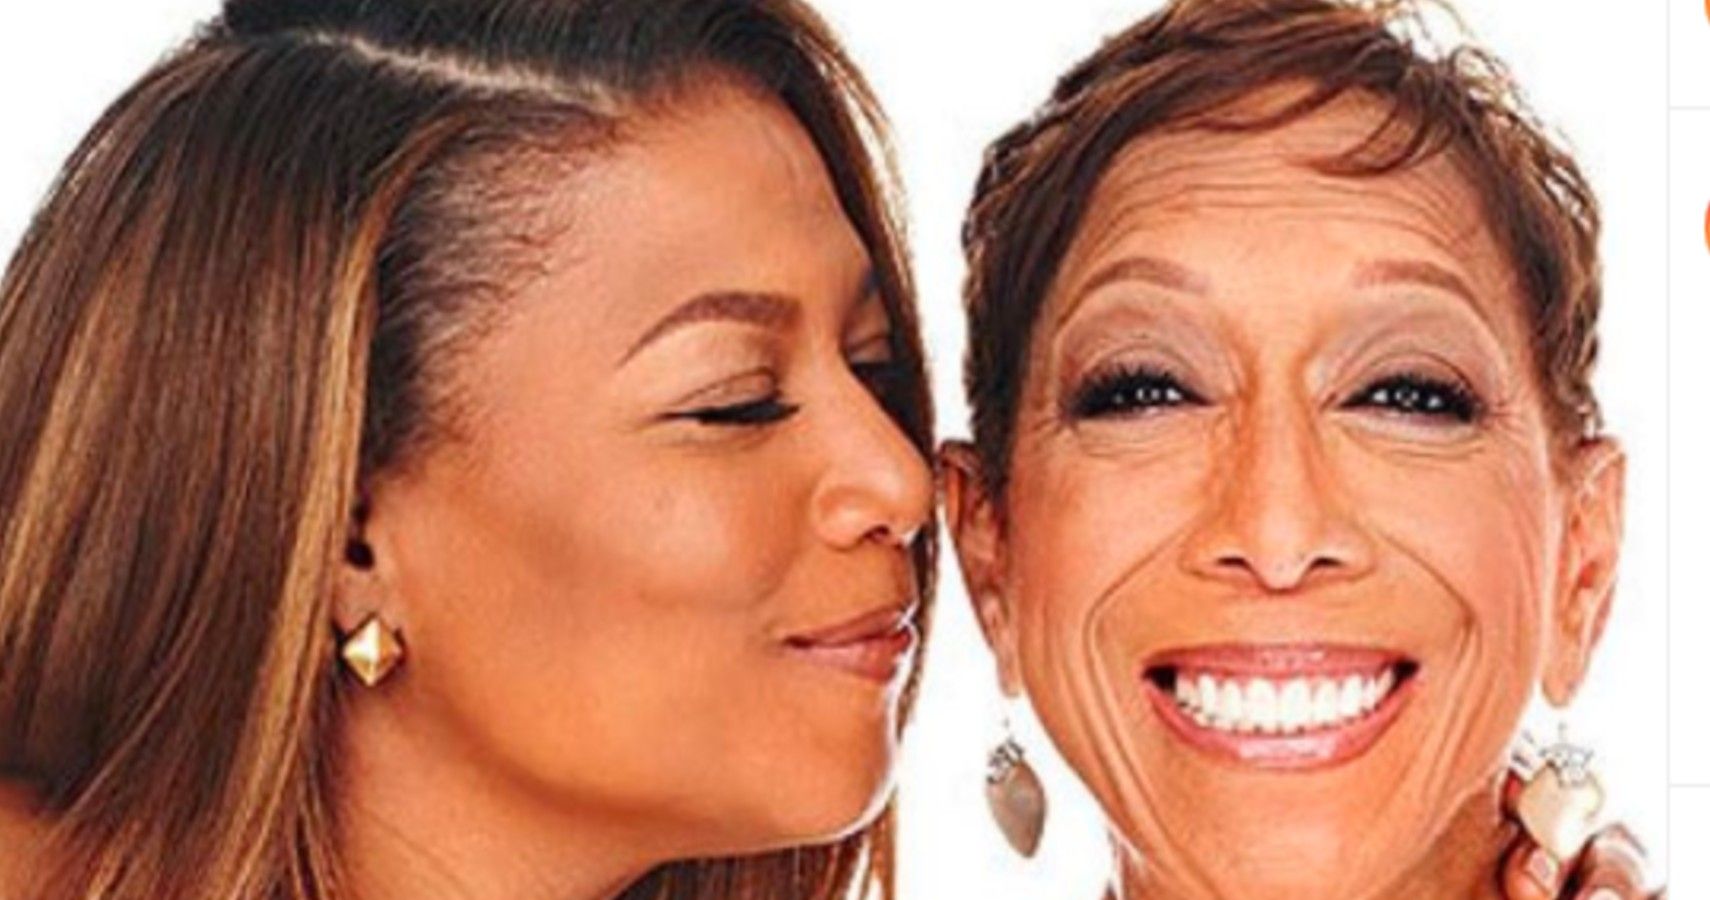 Queen Latifah Spills Heart Out About Losing Her Mom